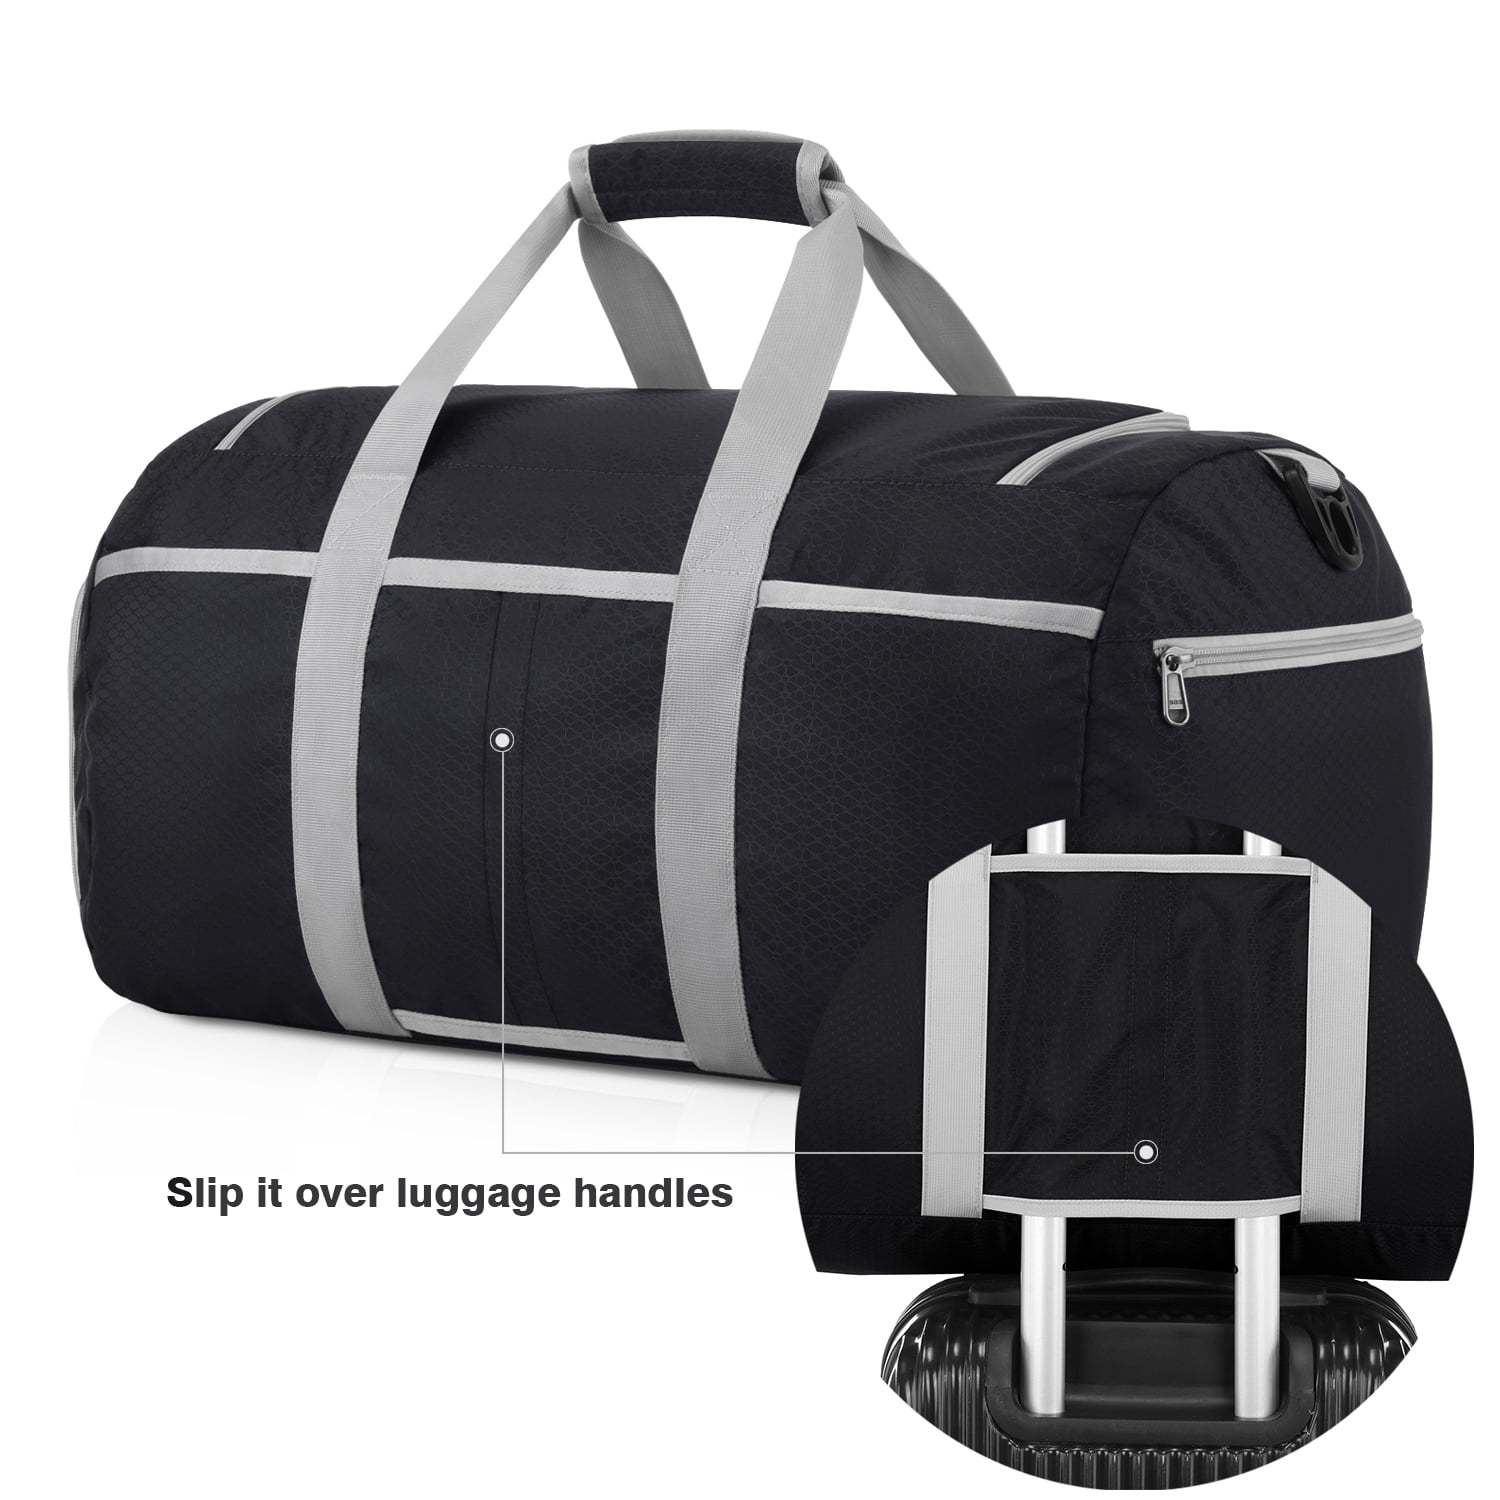 Lightweight Luggage Duffel Sports Gym Bag with Shoe Compartment Gonex 70L Packable Travel Duffle 